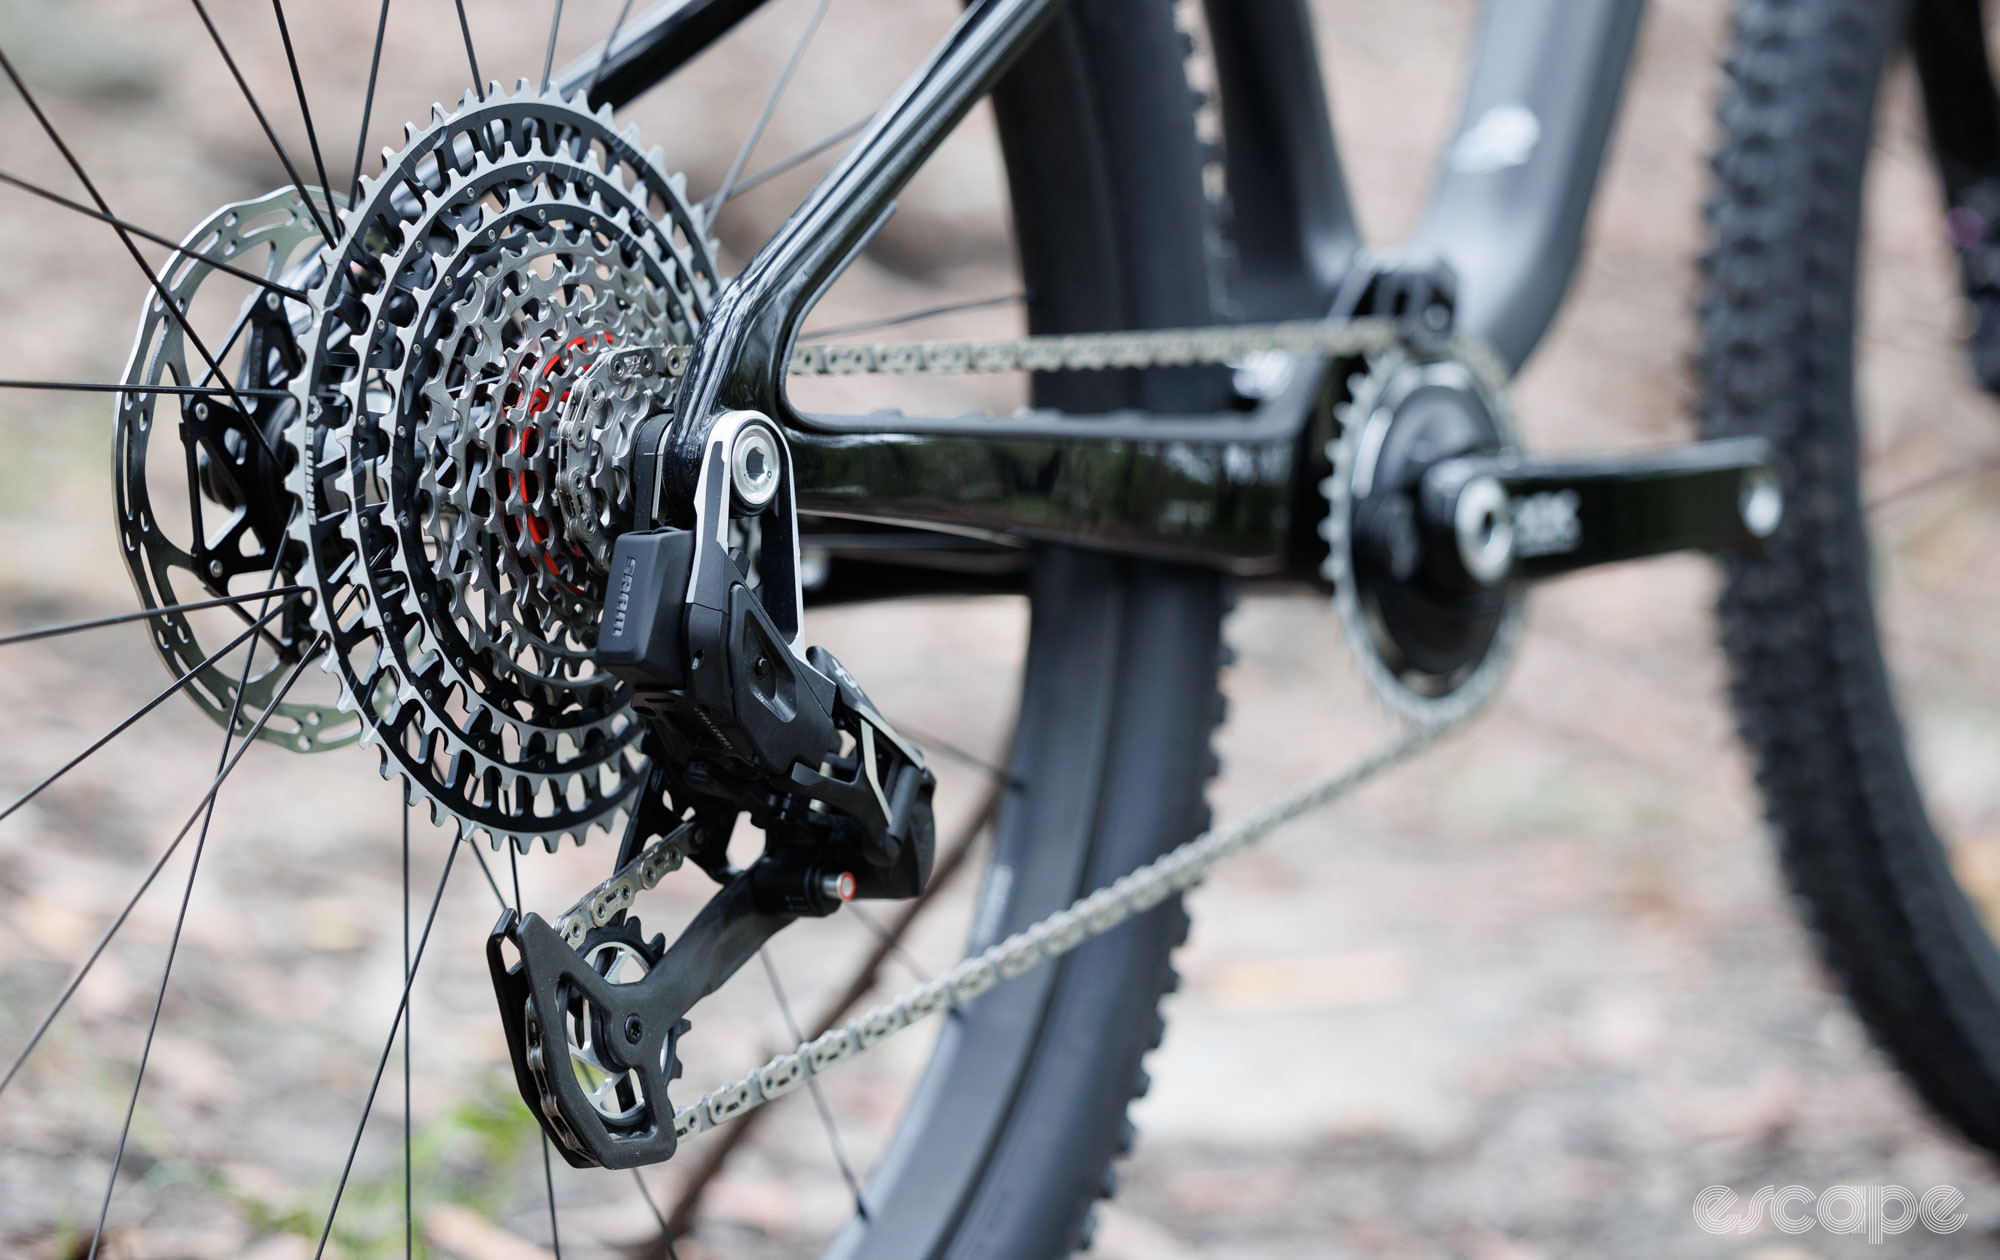 SRAM XX SL Transmission drivetrain shown, including the T-type mount to the frame. 